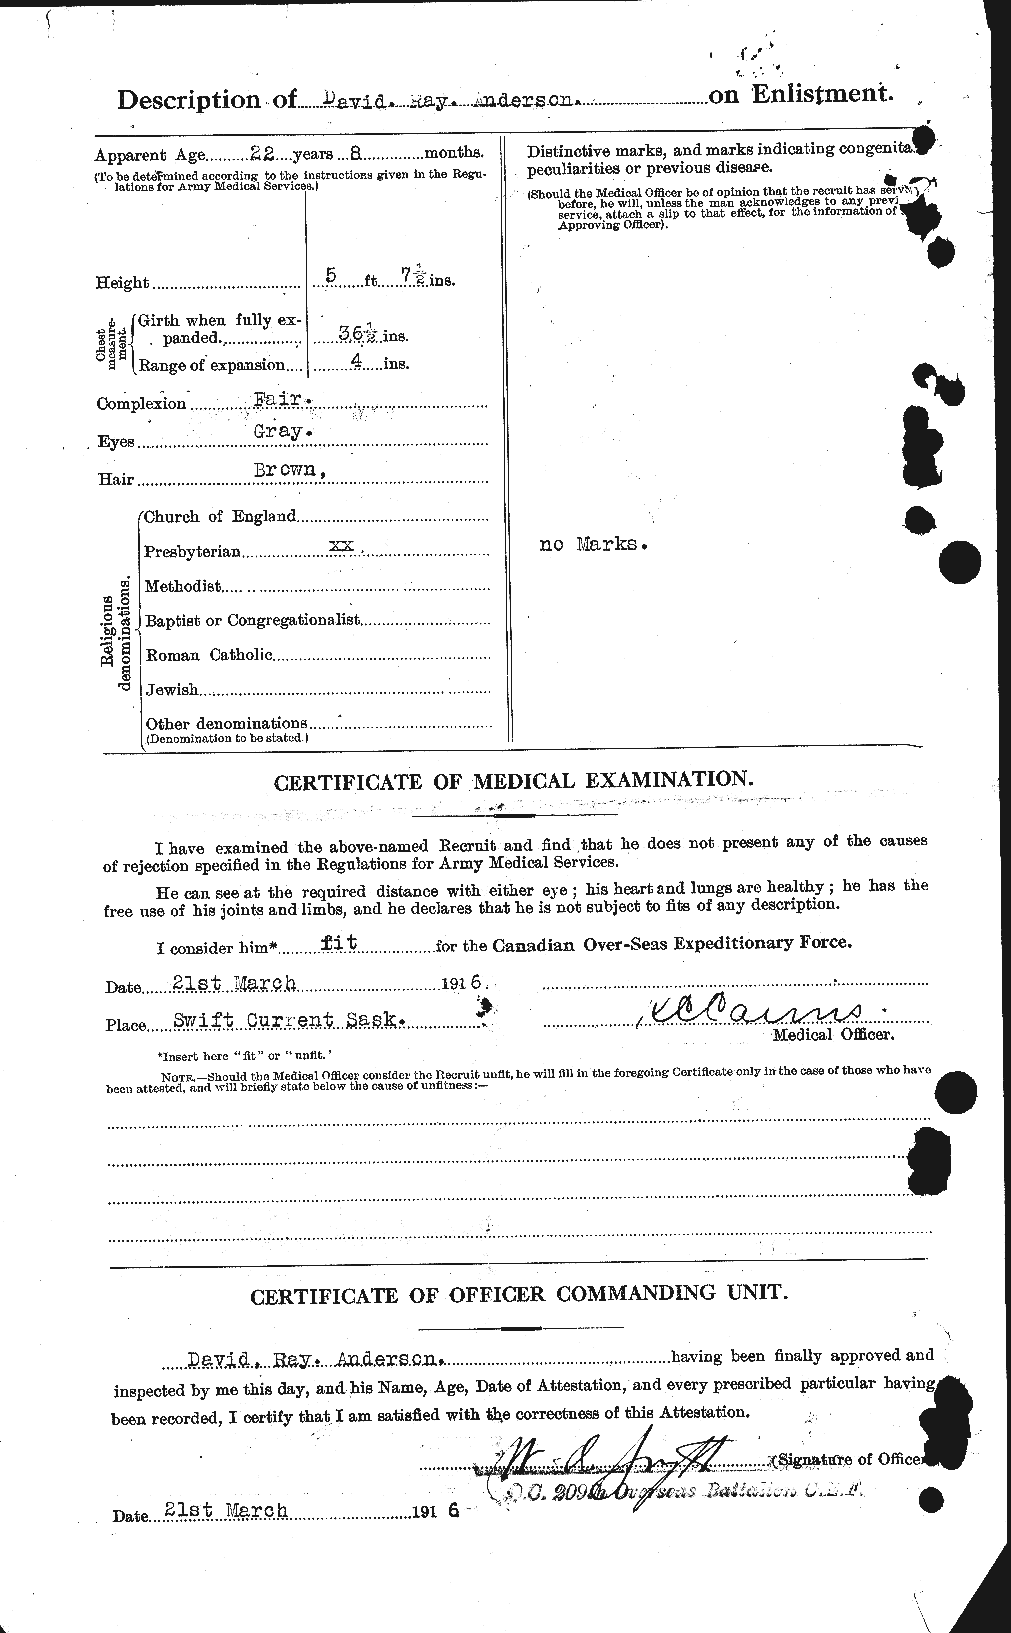 Personnel Records of the First World War - CEF 210004b